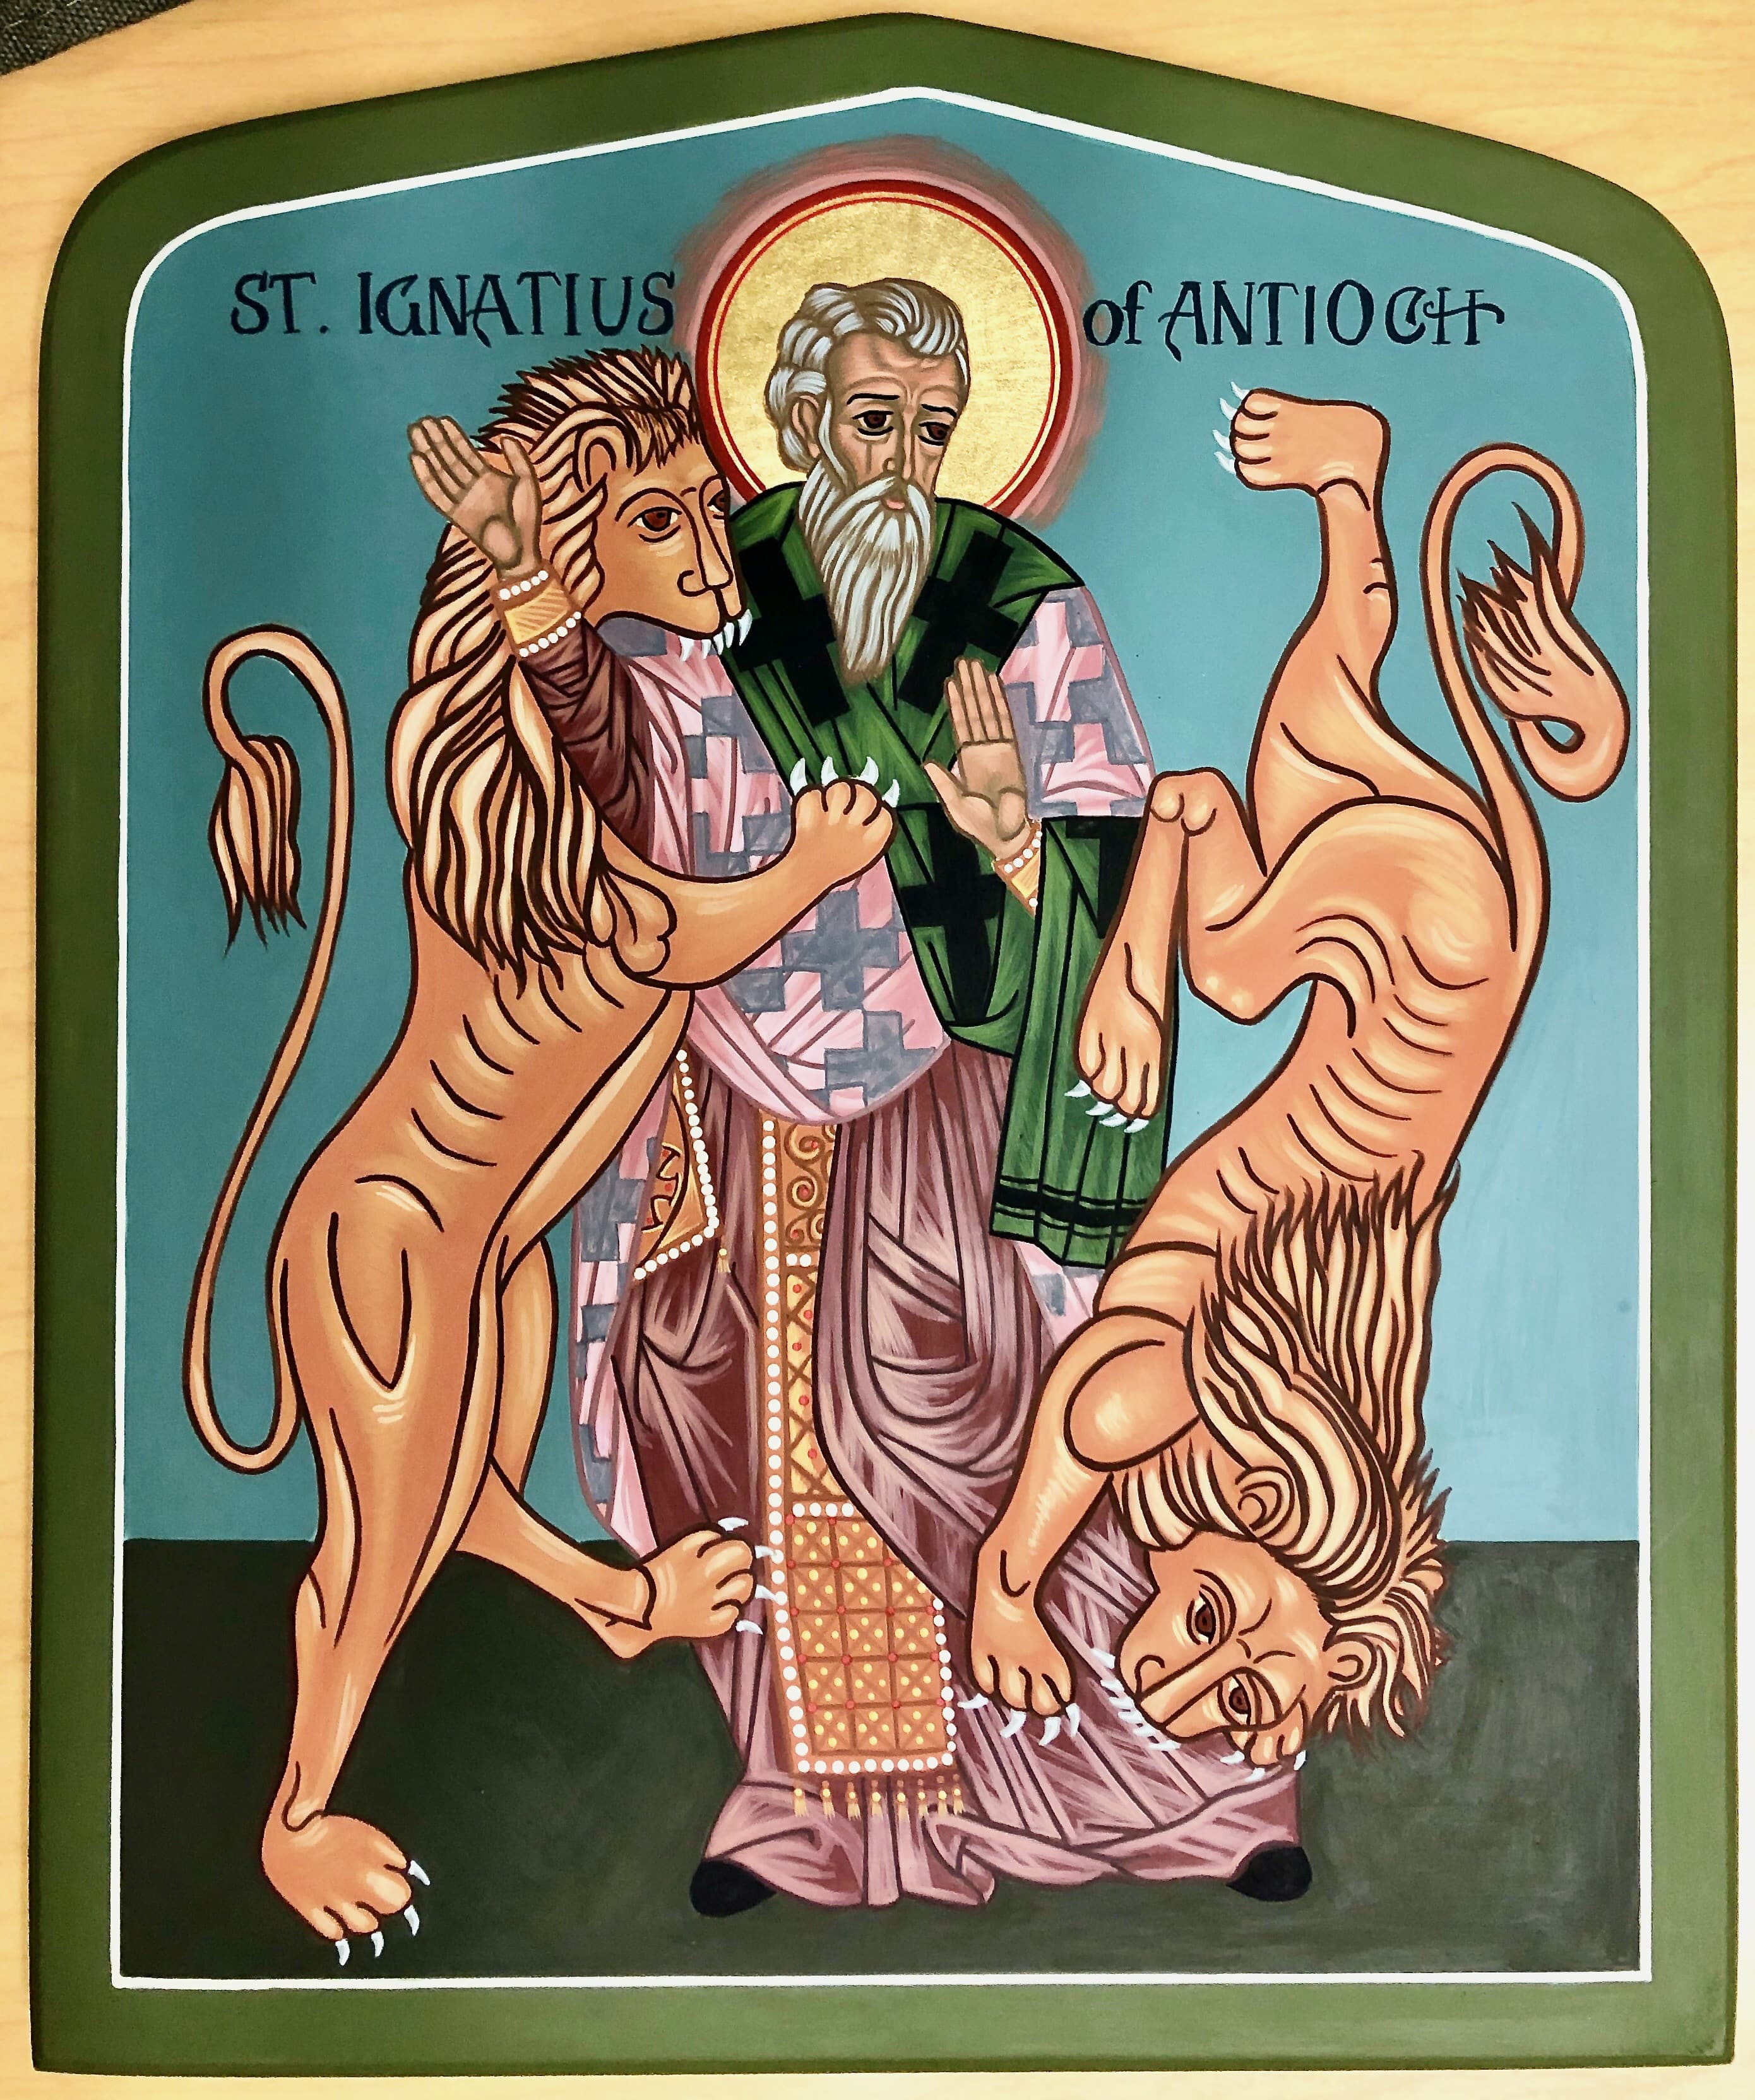 St. Ignatius of Antioch, Apostolic Father, Bishop of Antioch, Feast day October 17.